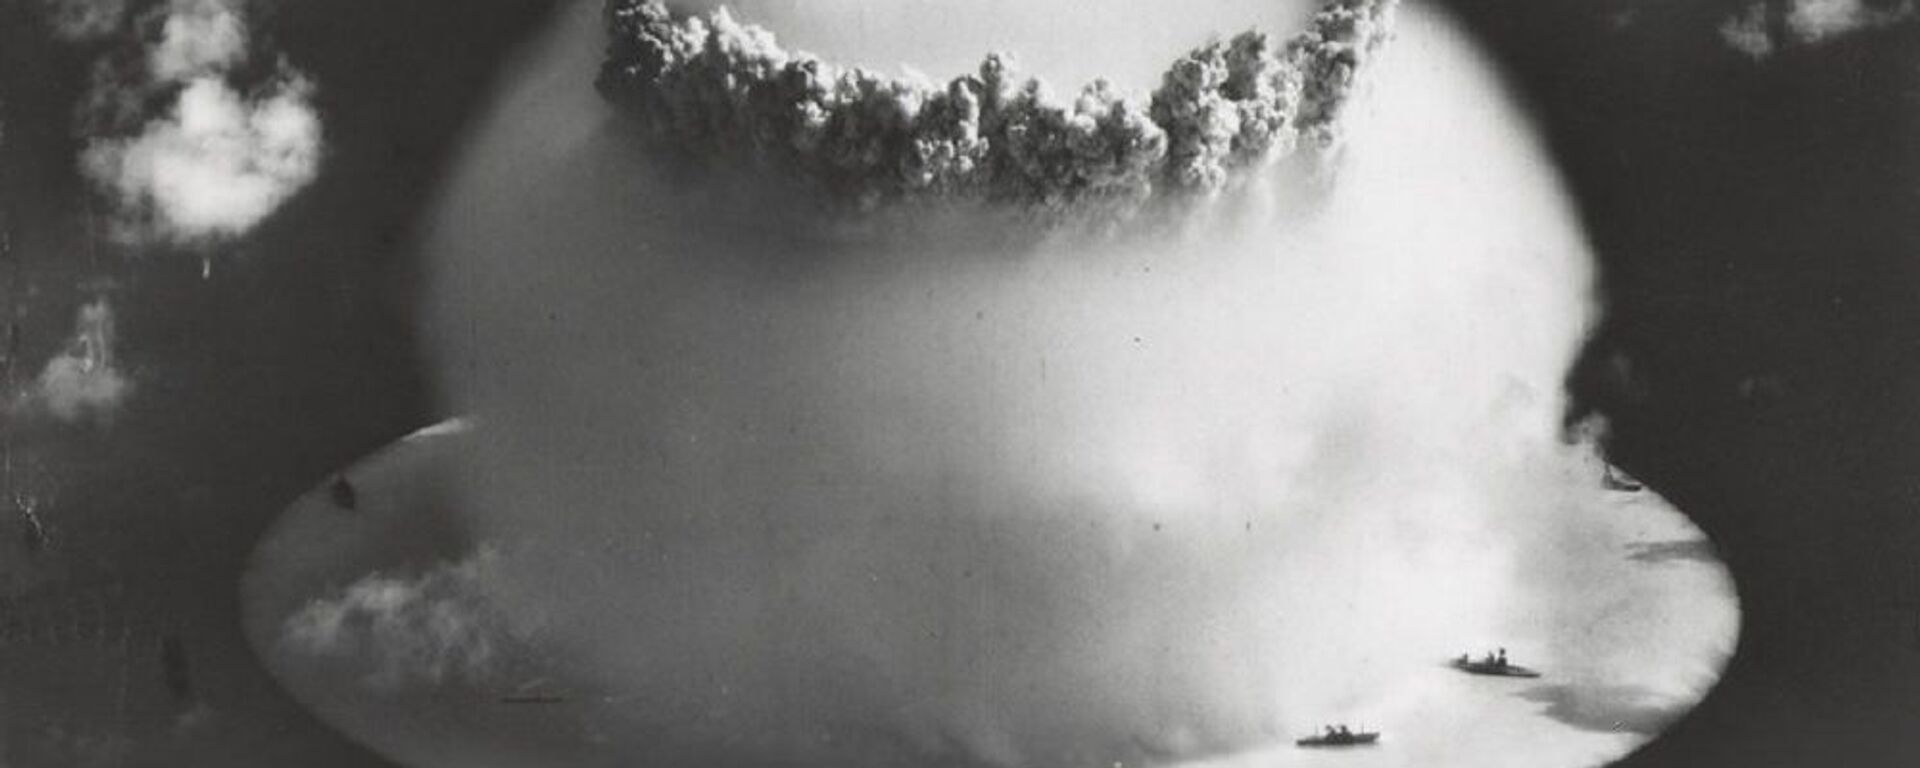 A 21 kiloton underwater nuclear weapons effects test, known as Operation CROSSROADS (Event Baker), conducted at Bikini Atoll (1946) - Sputnik International, 1920, 16.08.2022